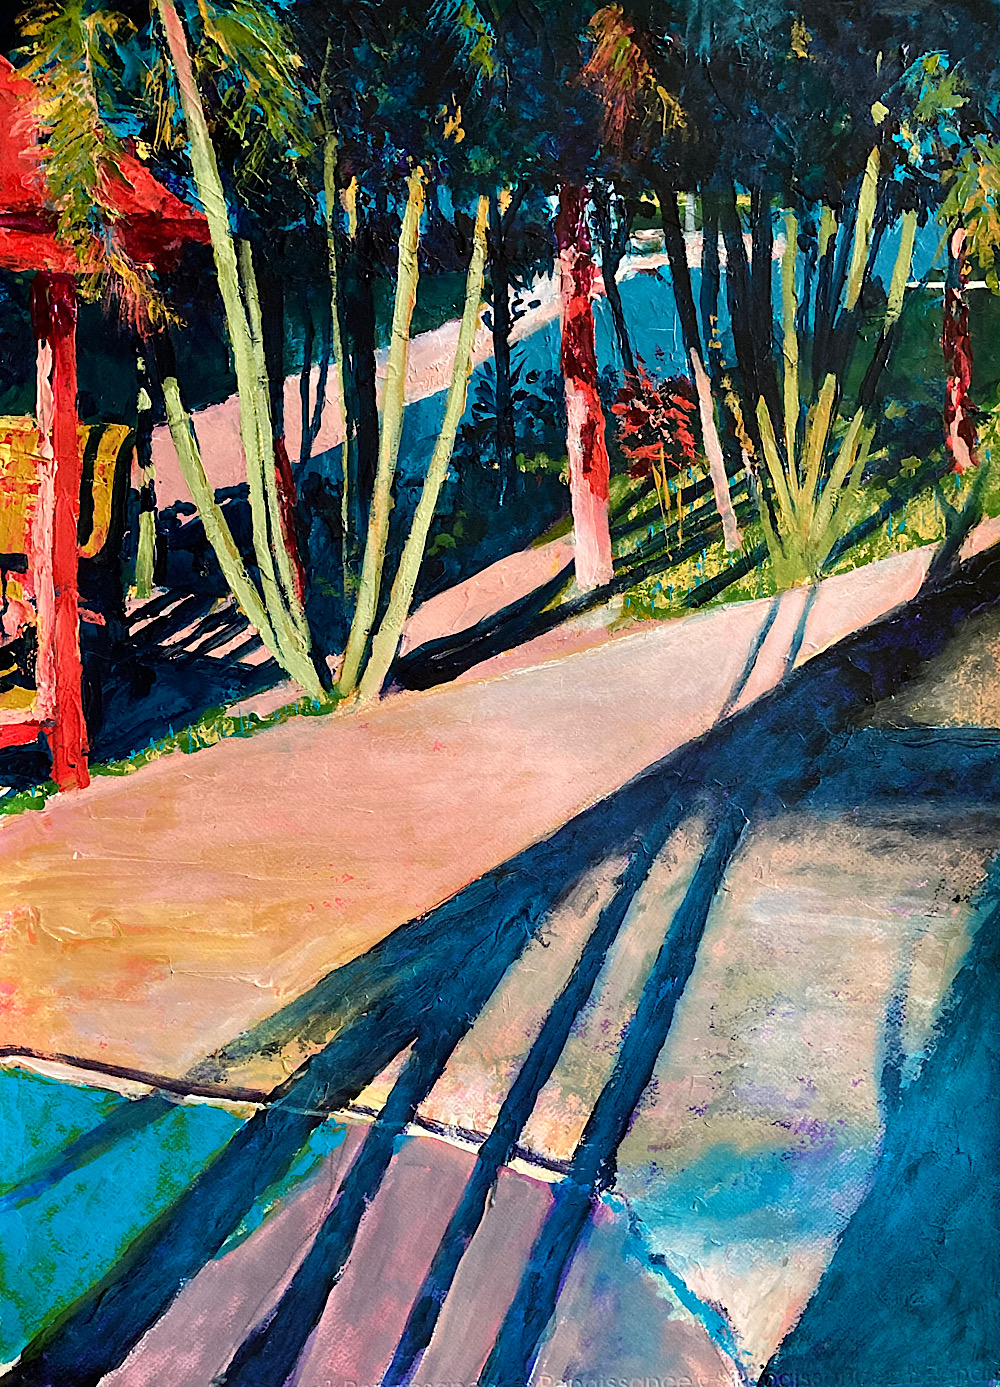 'Afternoon Shadows', John Cottee, Acrylic on watercolour paper, 75 x 55 cm